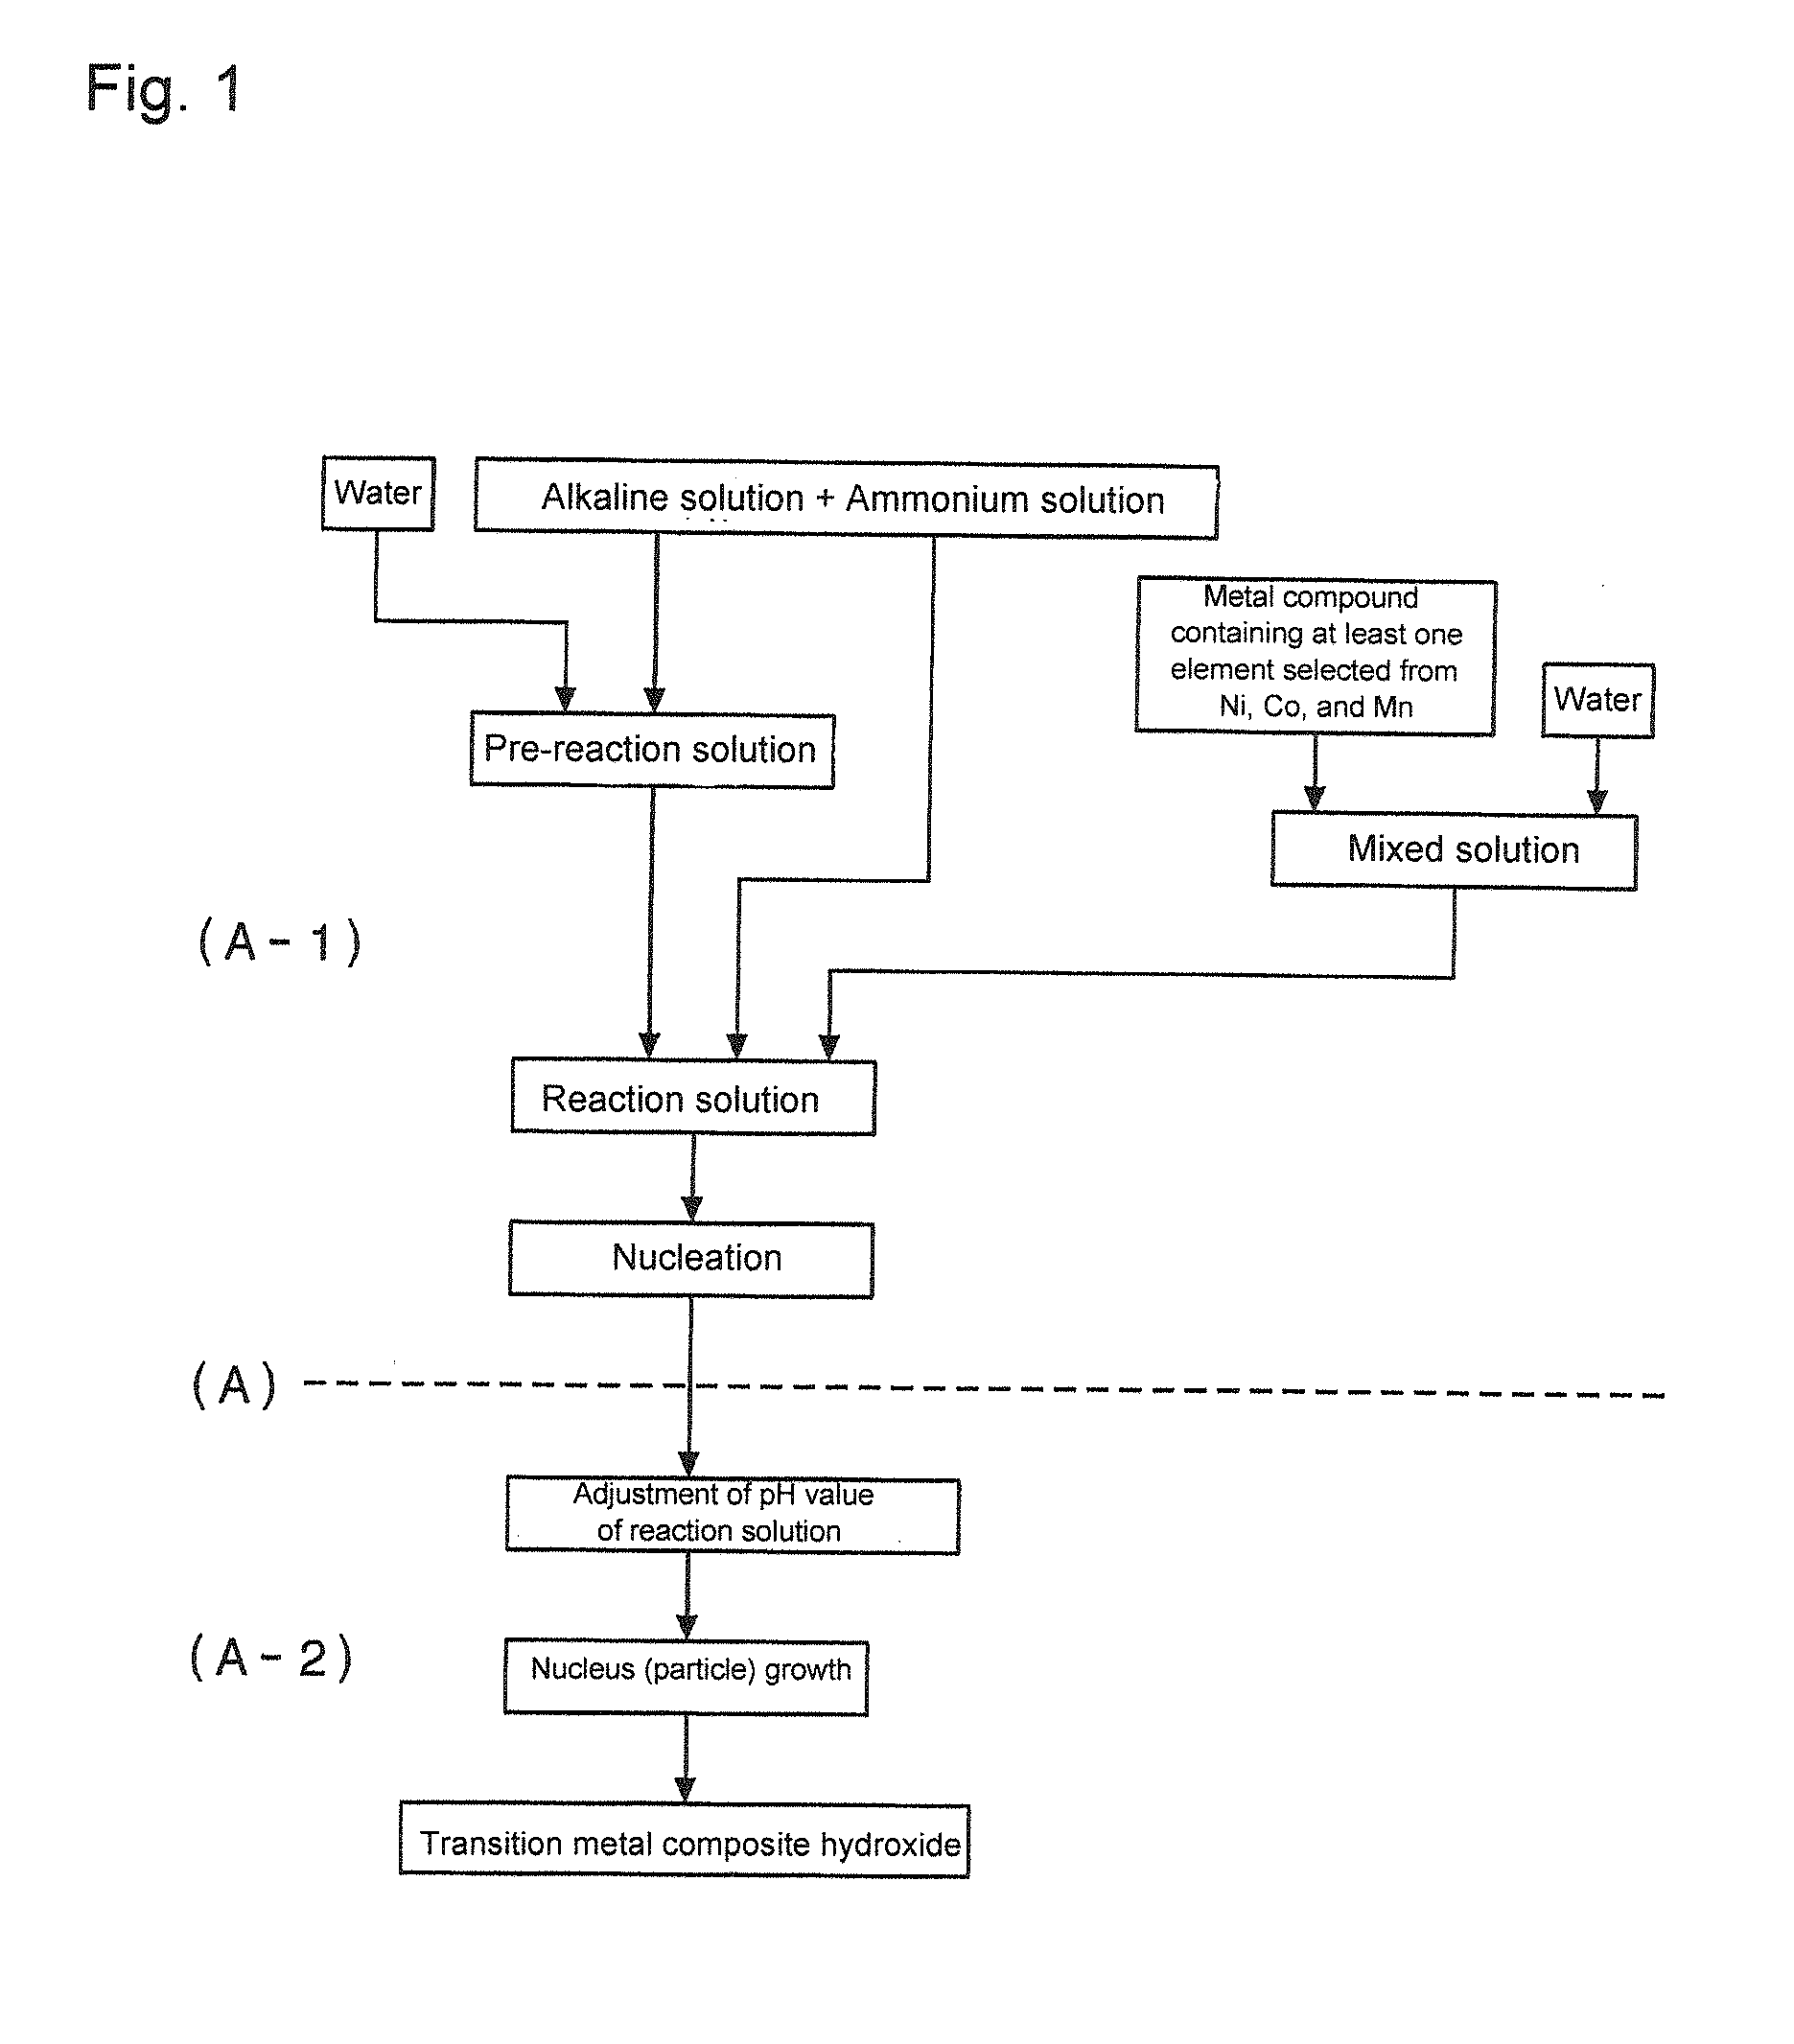 Transition metal composite hydroxide capable of serving as precursor of positive electrode active material for nonaqueous electrolyte secondary batteries, method for producing same, postive electrode active material for nona queous electrolyte secondary batteries, method for producing positive electrode active material, and nonaqueous electrolyte secondary battery using postivie electrode active material